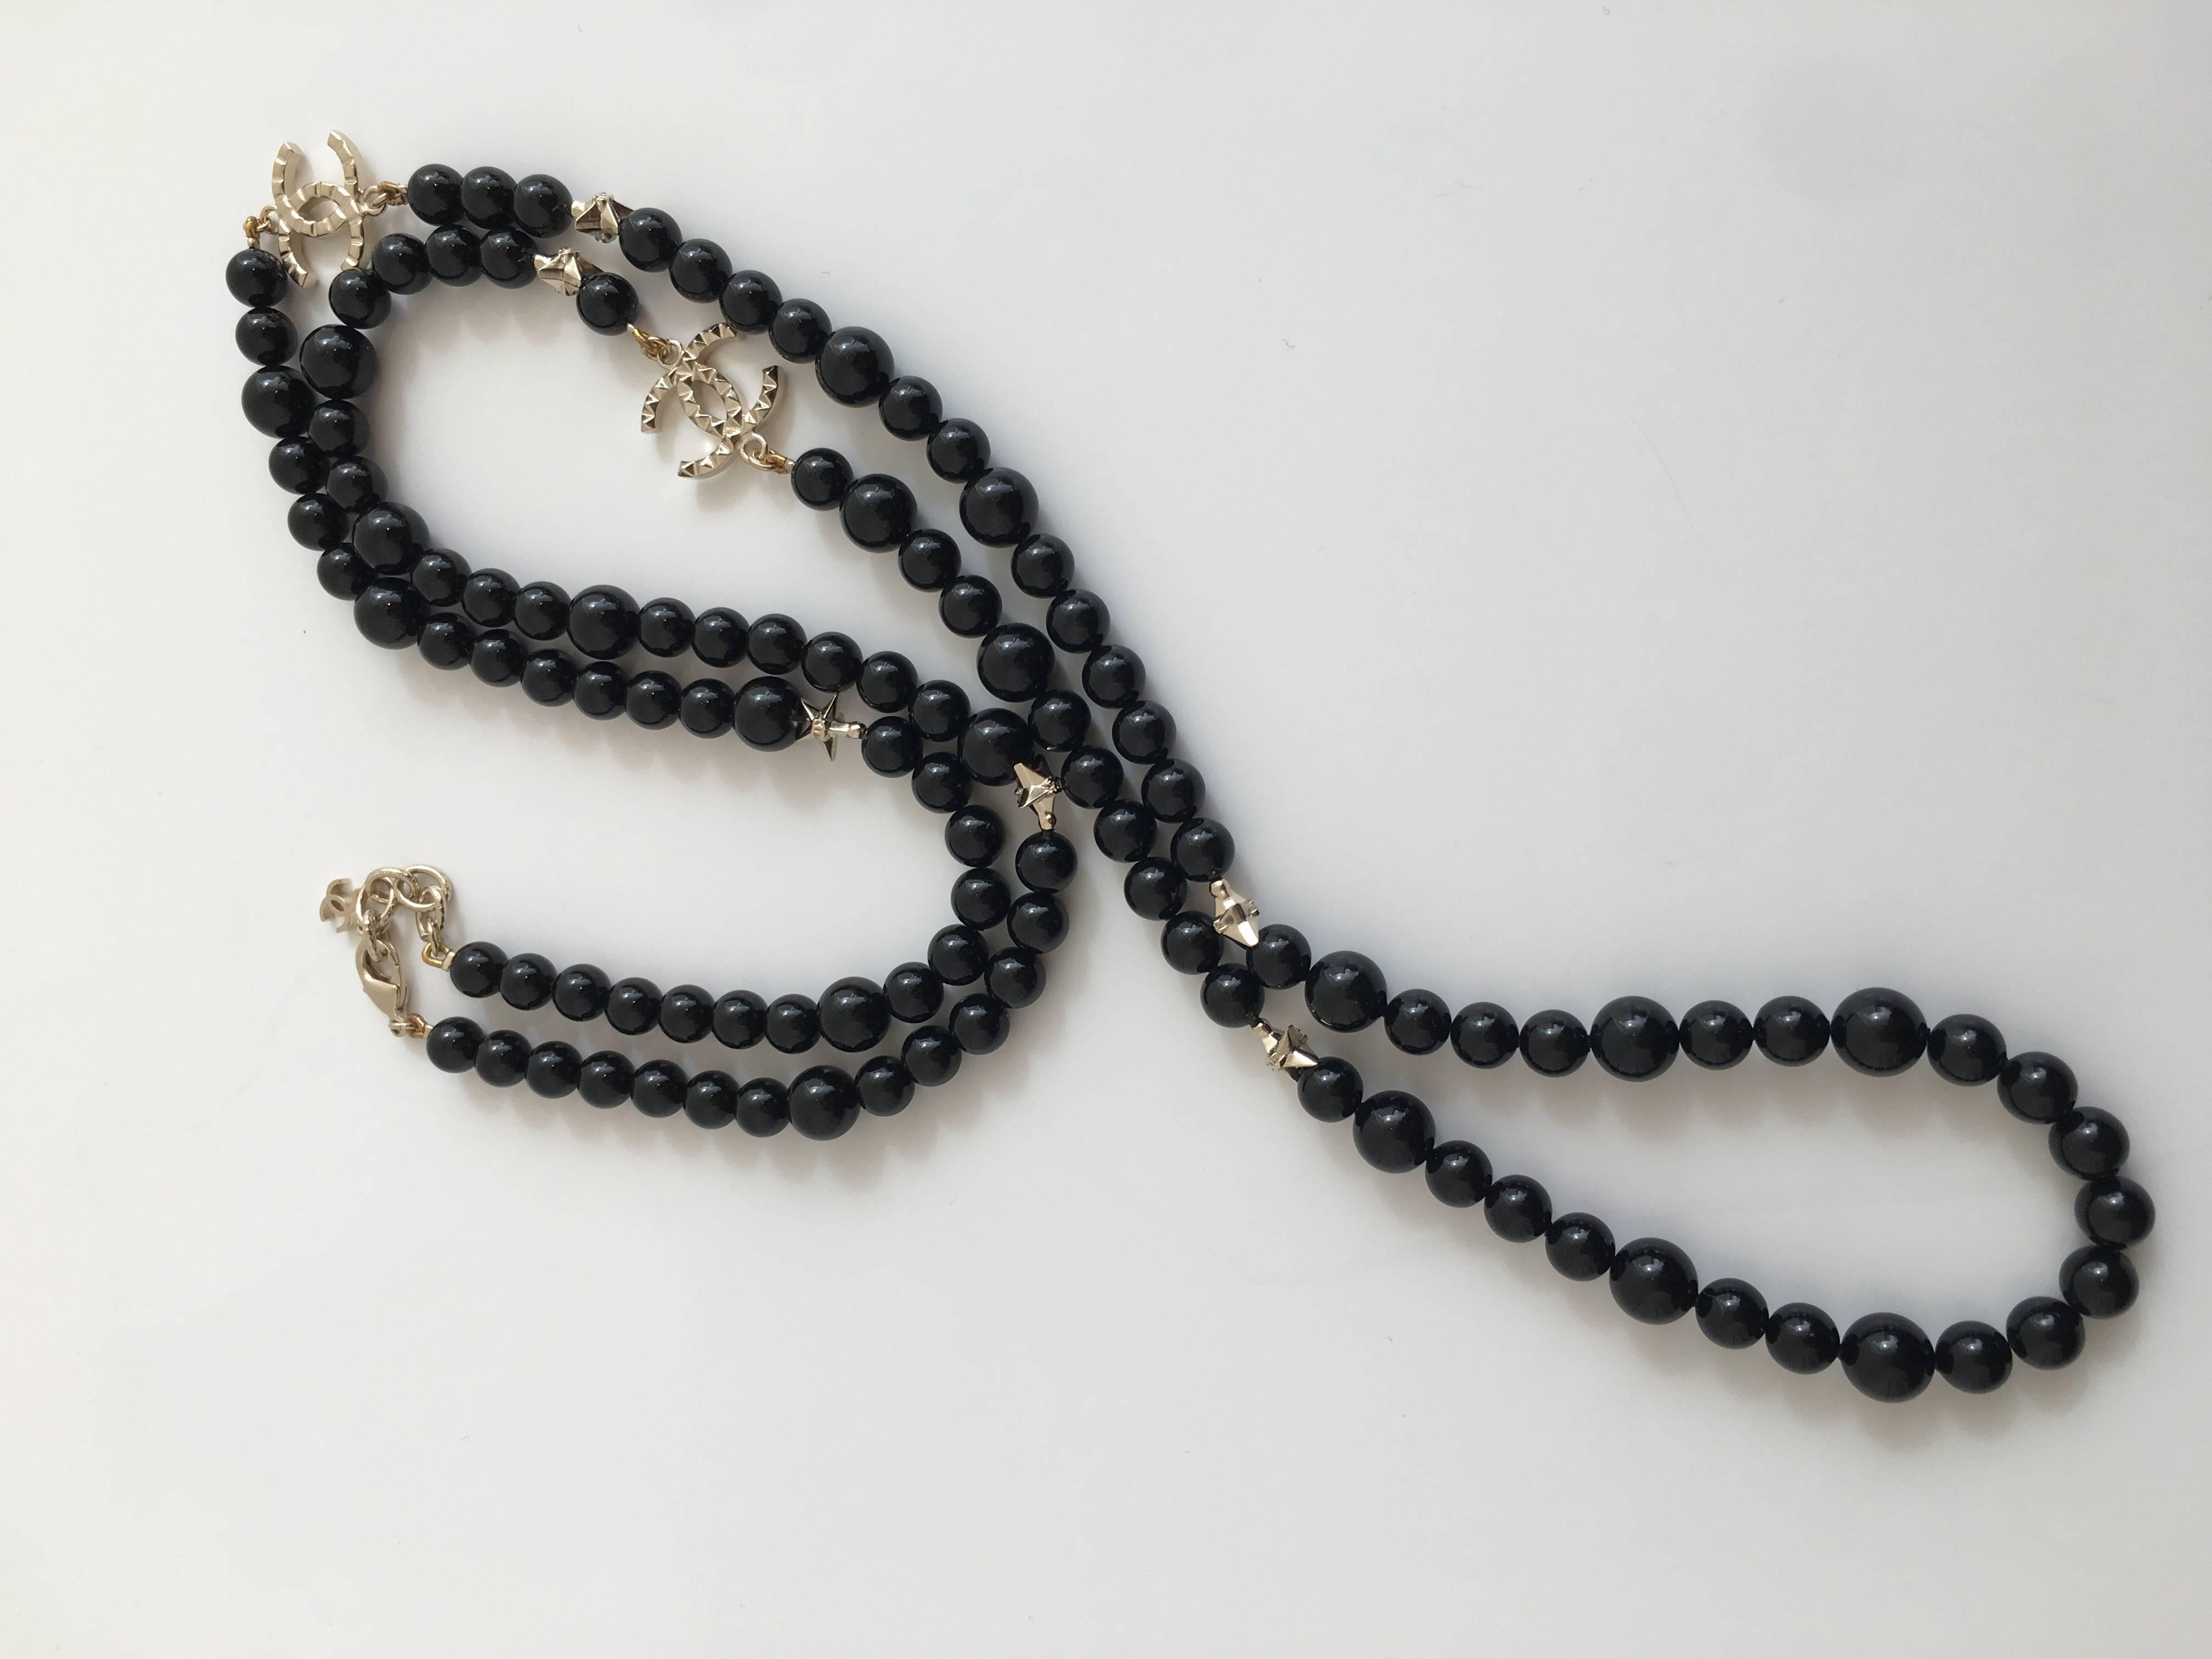 Chanel single strand black beaded necklace with two CC charms and six smaller star shaped beads. The CC and star beads are a muted gold color metal.

The necklace comes in a soft Chanel case.